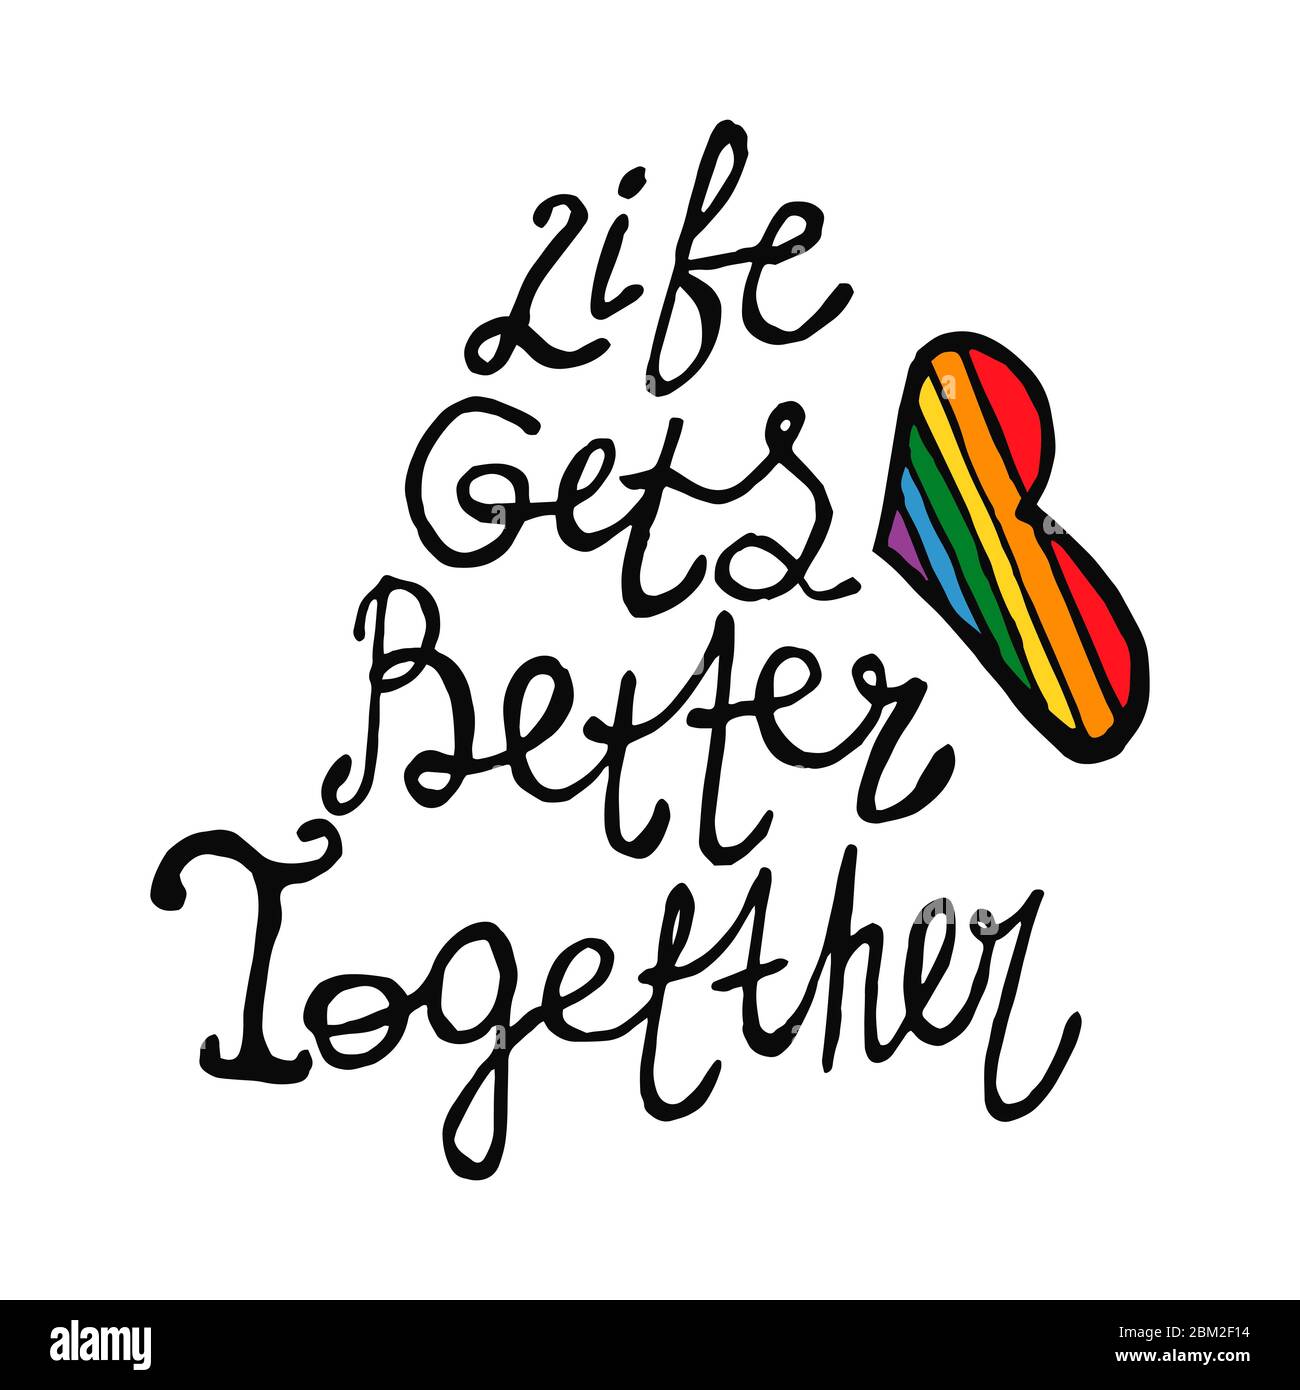 Lettering Text In Doodle Style Life Gets Better Together Hand Written Pride Love Peace